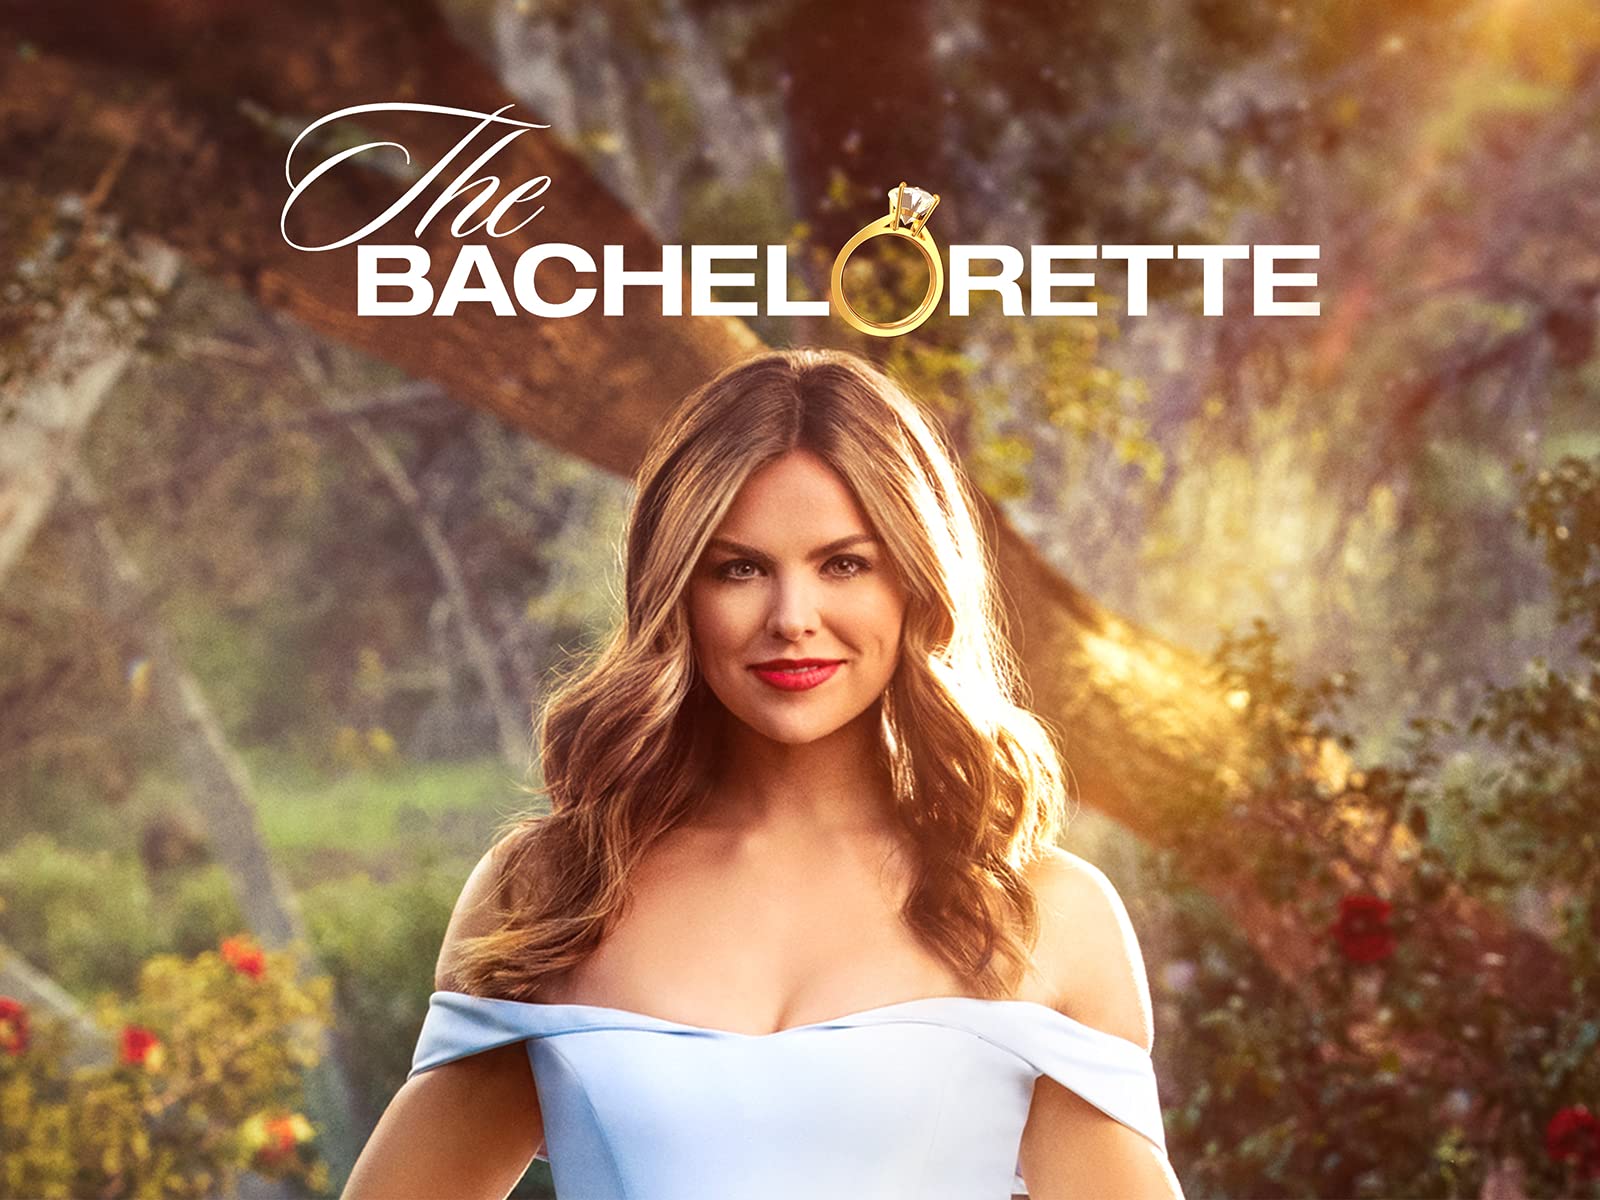 The Bachelorette Wallpapers